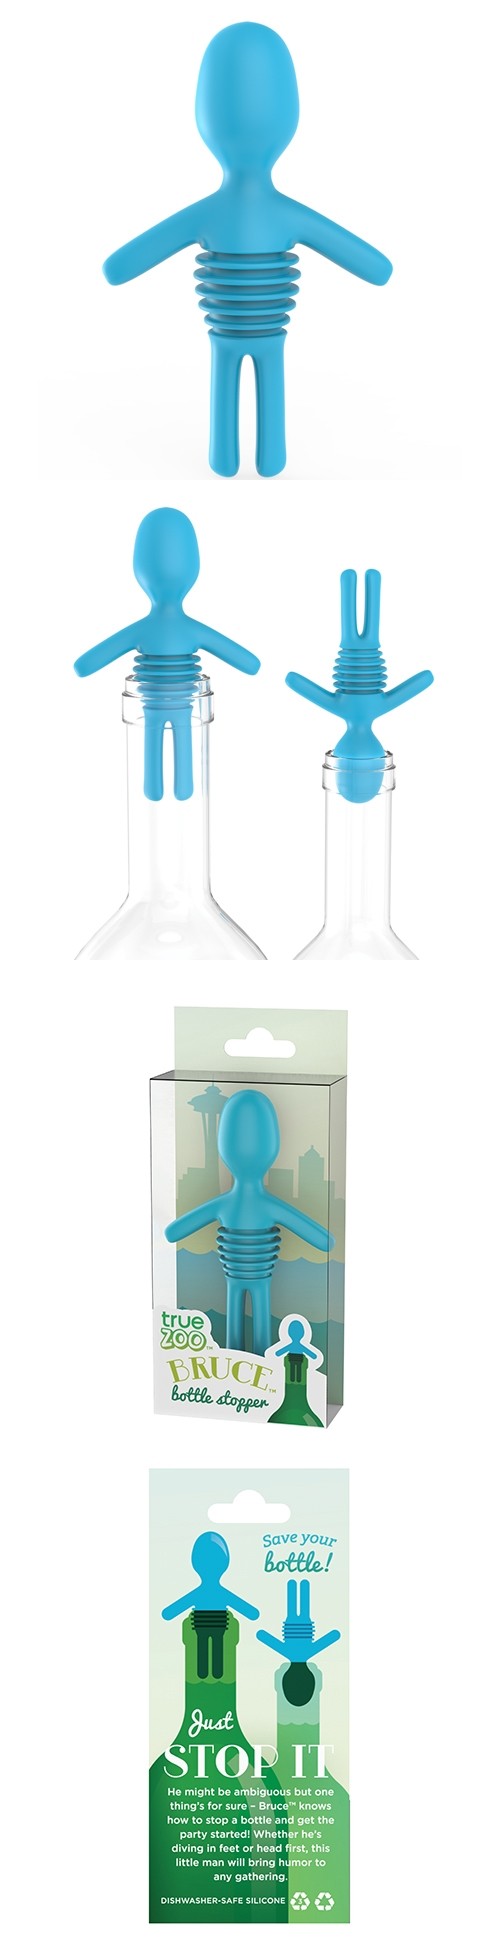 Bruce Silicone Bottle Stopper in Blue by TrueZOO